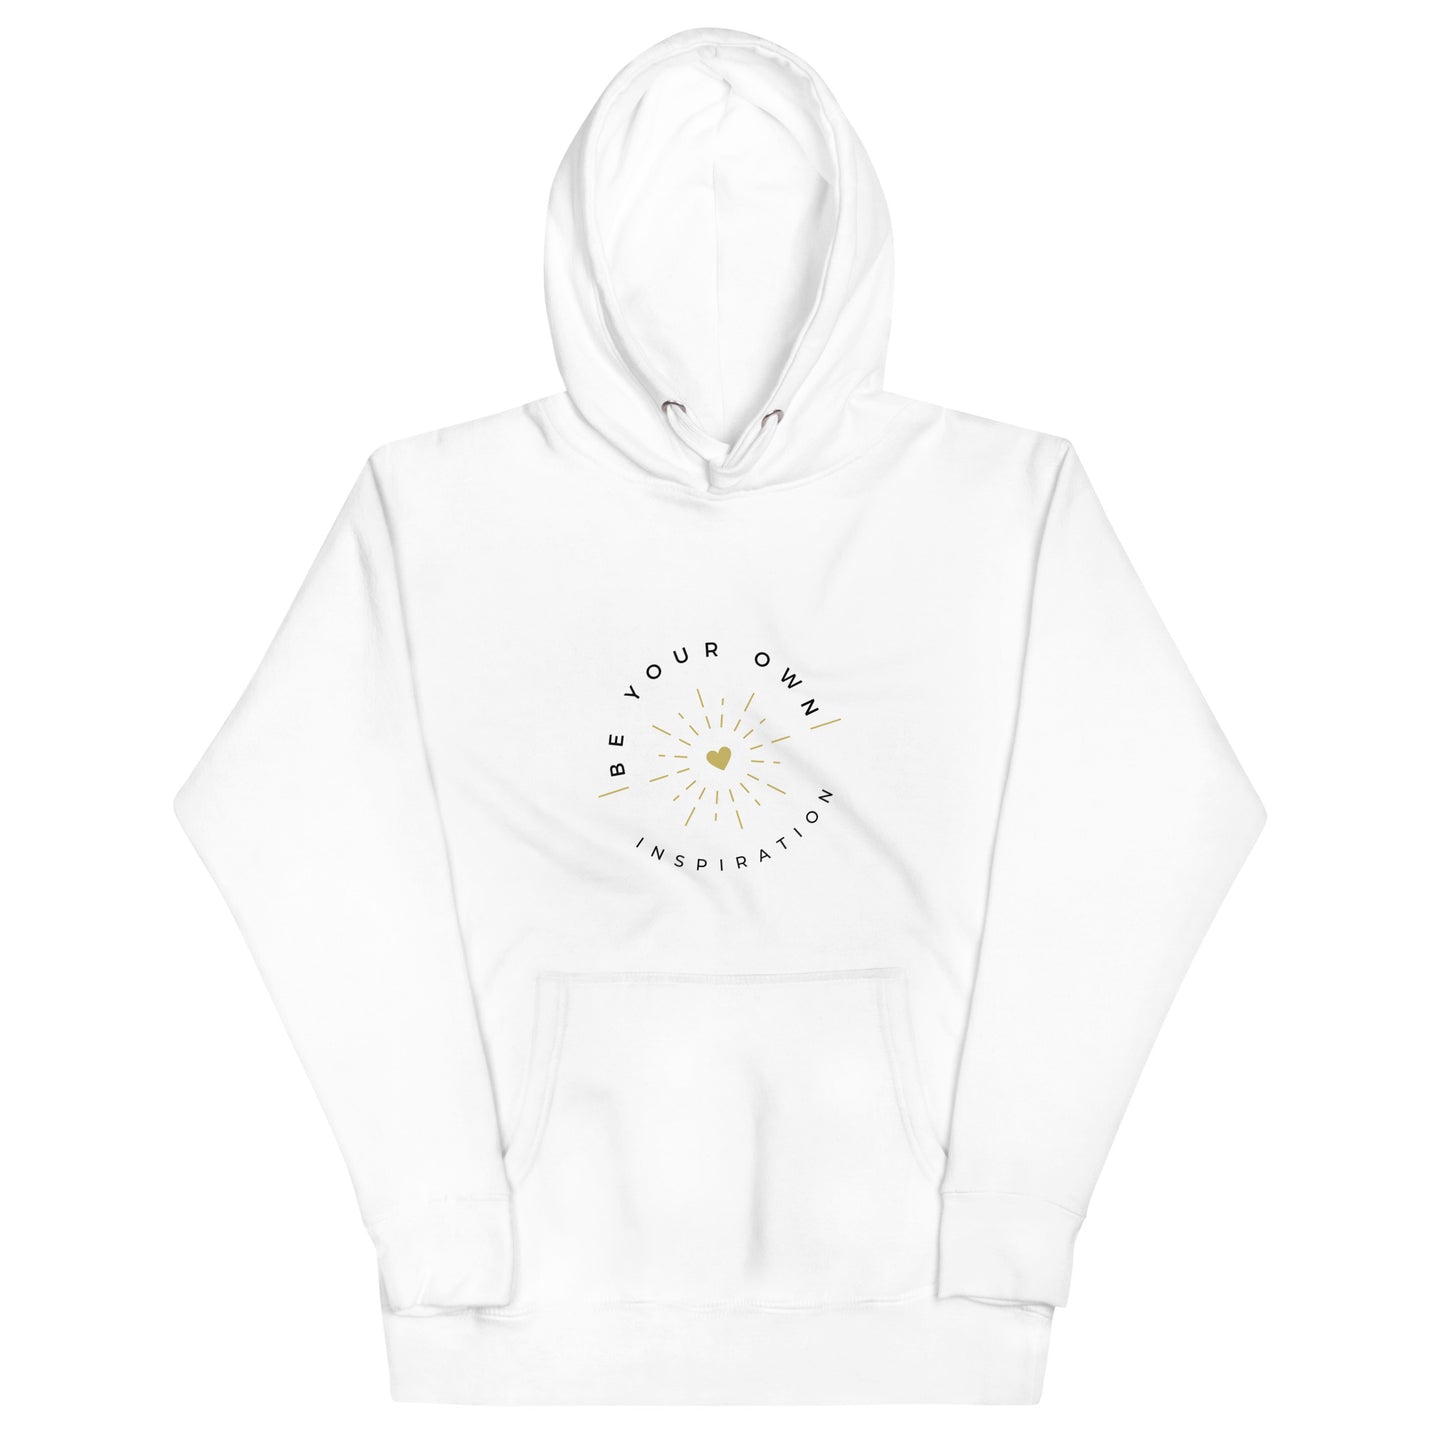 Unisex Hoodie - BE YOUR OWN INSPIRATION